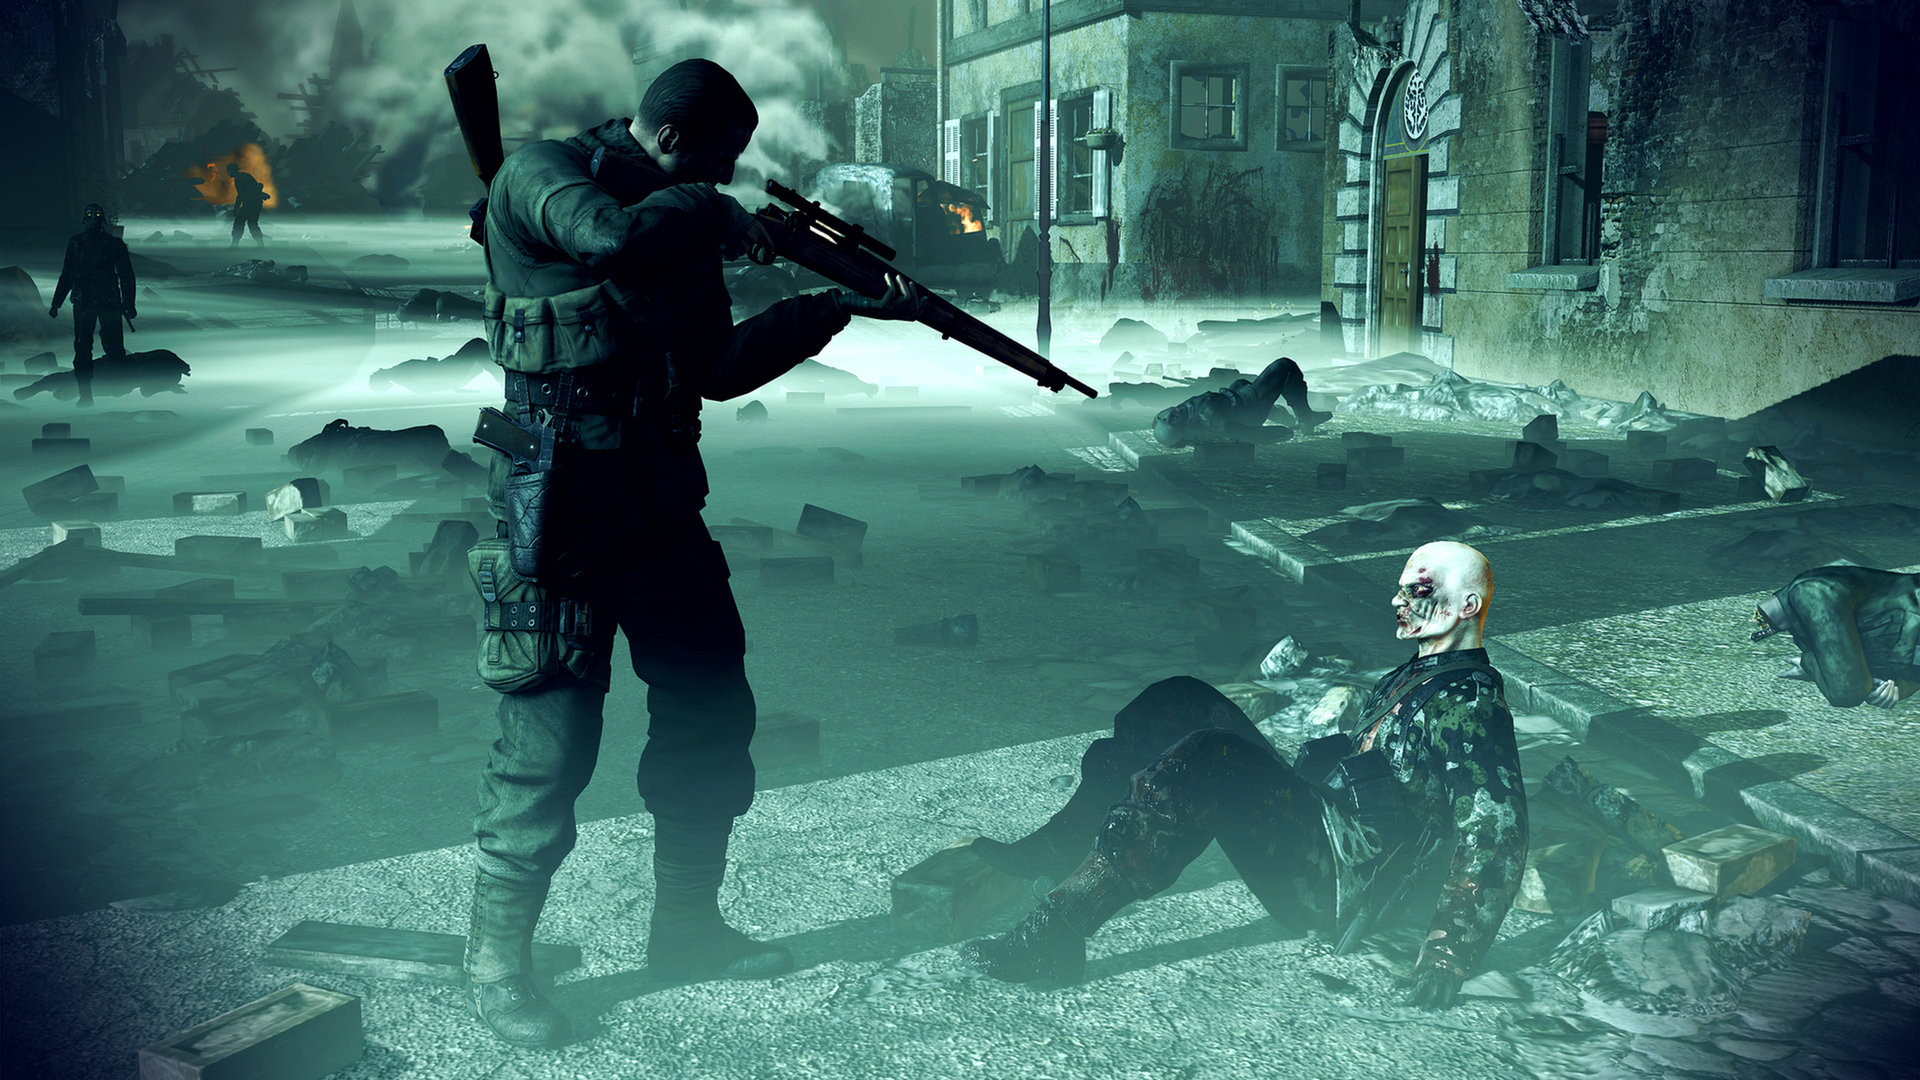 Best Sniper Elite: Nazi Zombie Army wallpaper ID:254326 for High Resolution hd 1080p PC